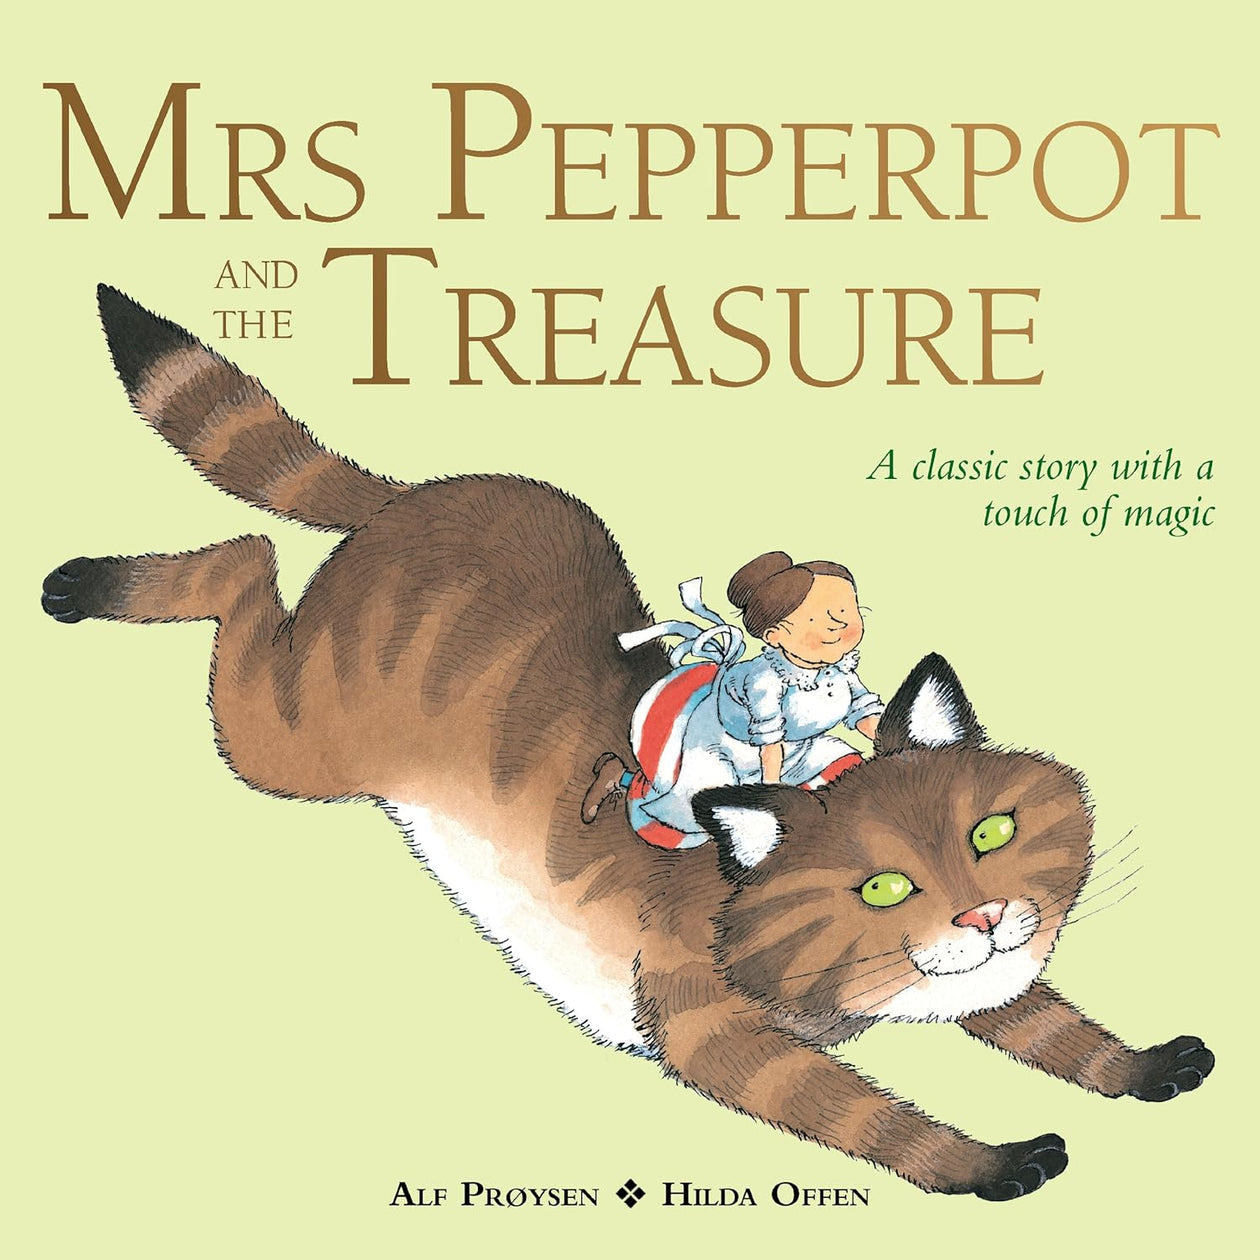 Alf Proysen: Mrs Pepperpot and the Treasure, illustrated by Hilda Offen